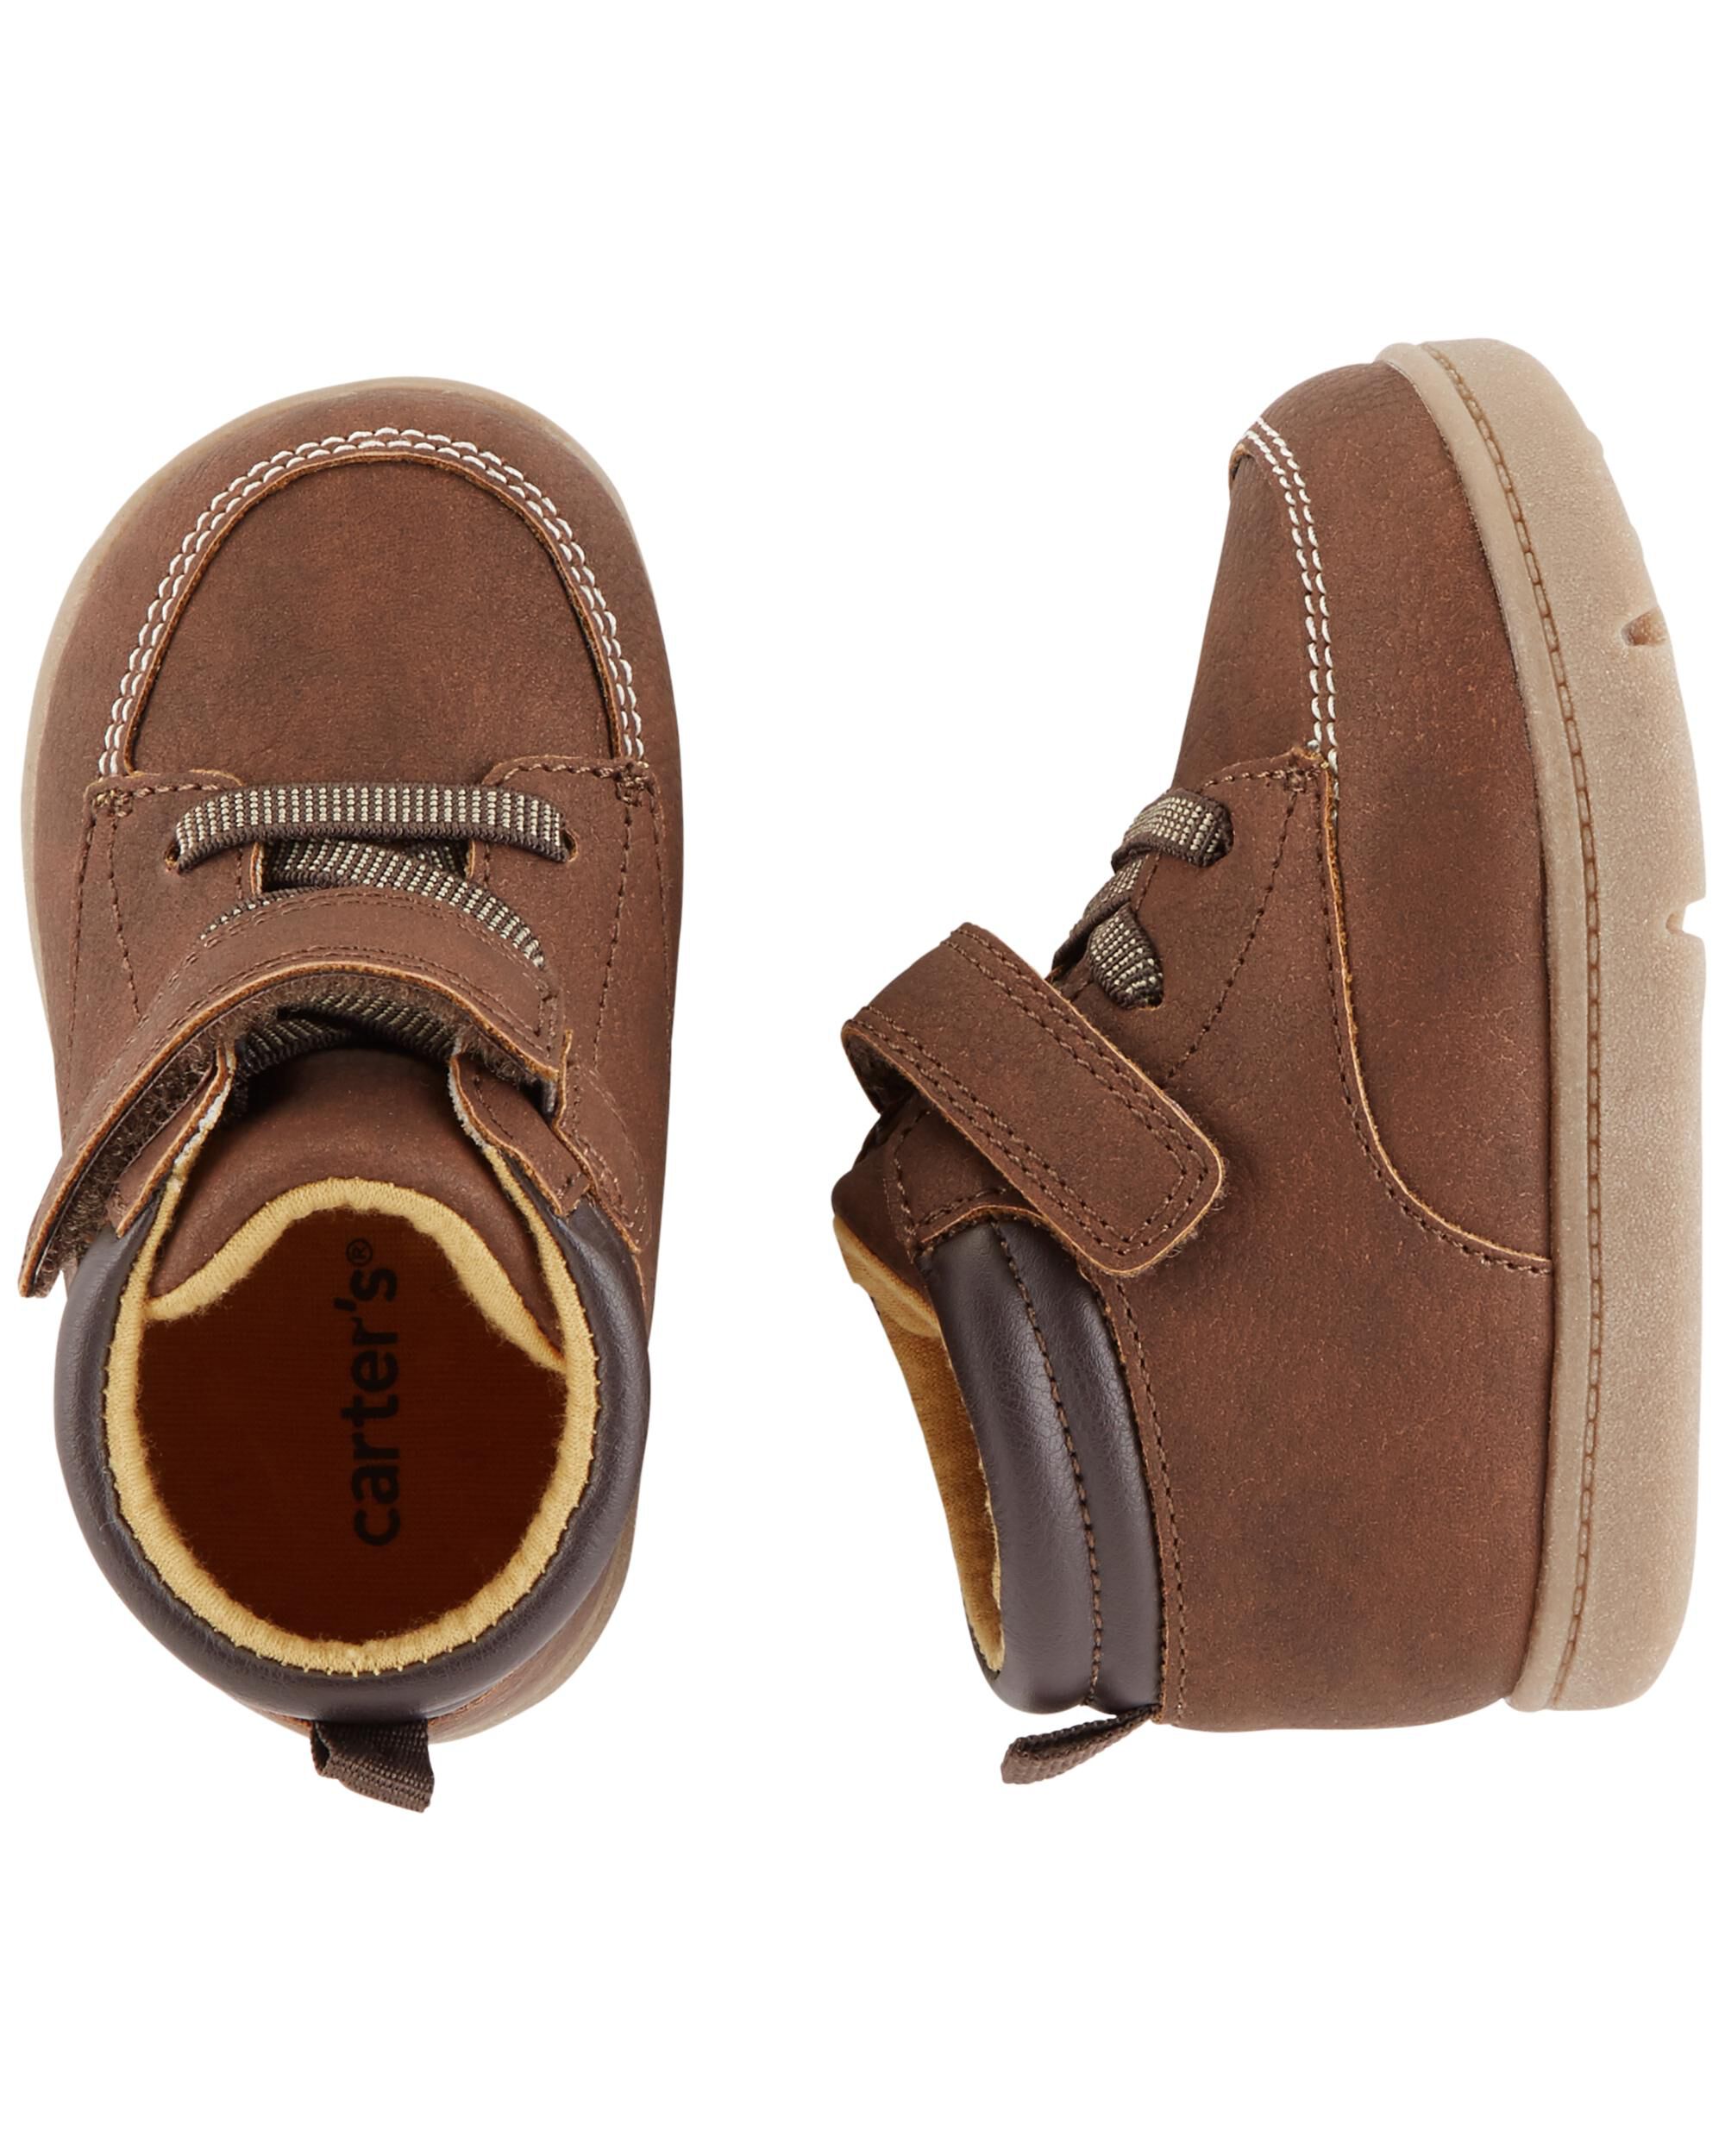 Nikson Every Step Boots | carters 